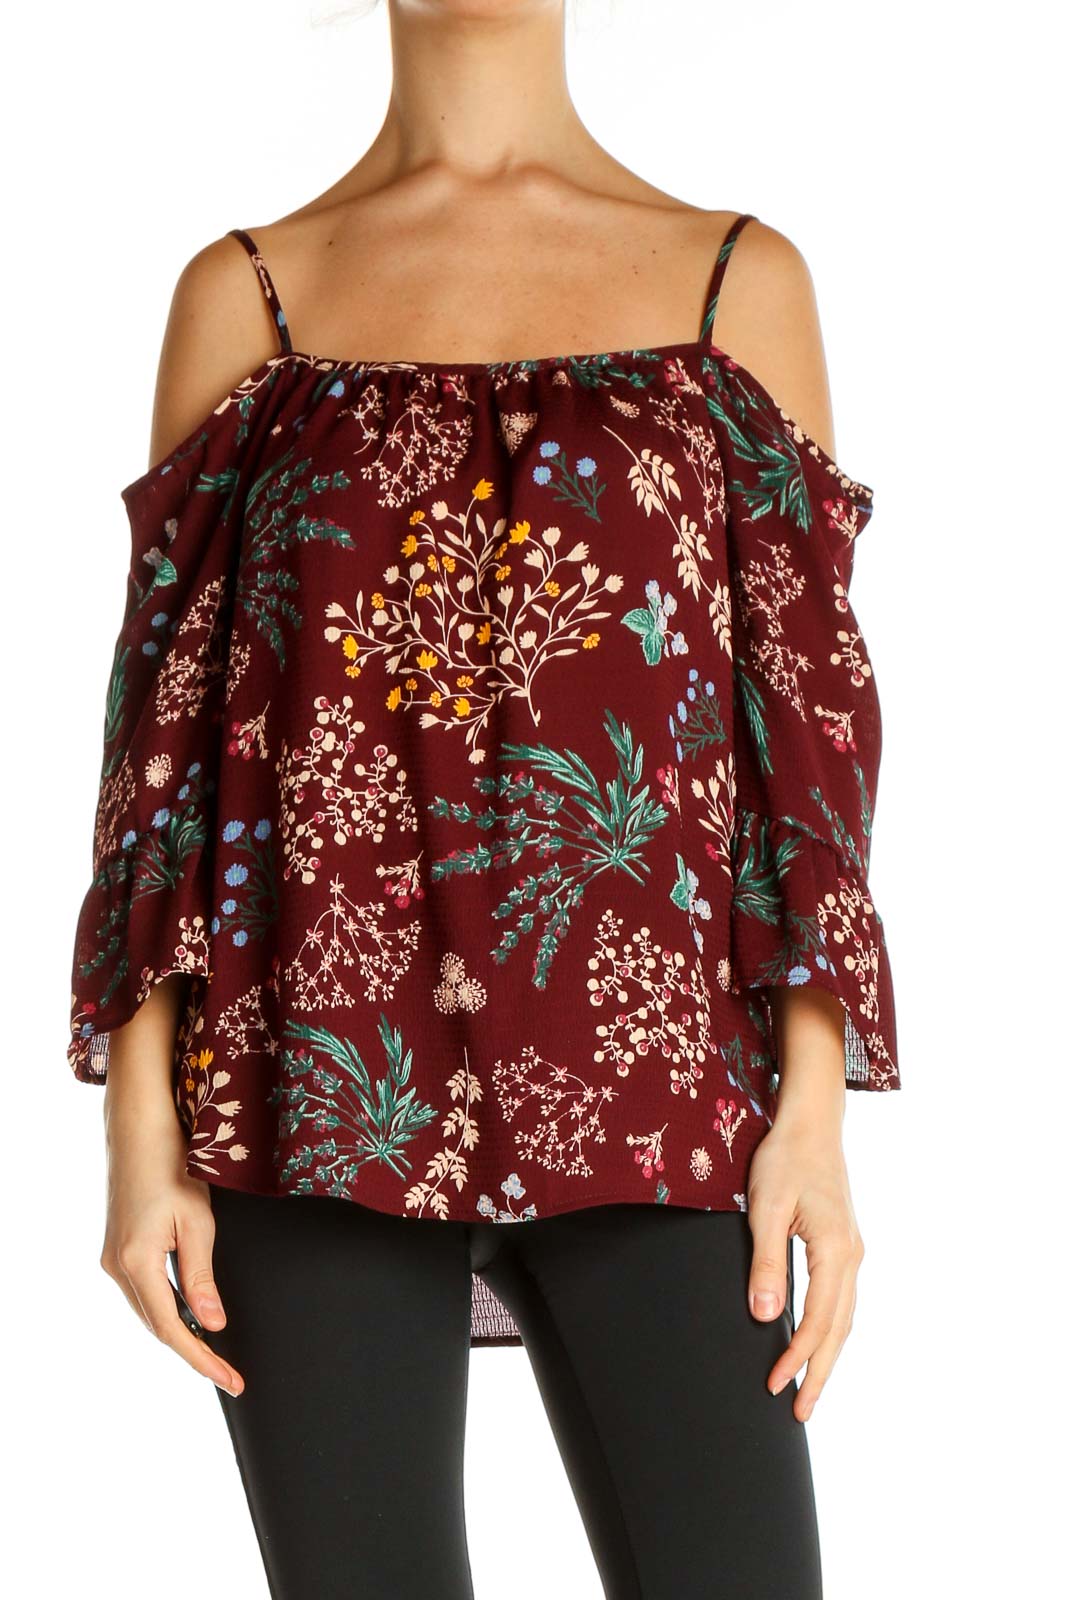 Red Floral Print Holiday Top Front